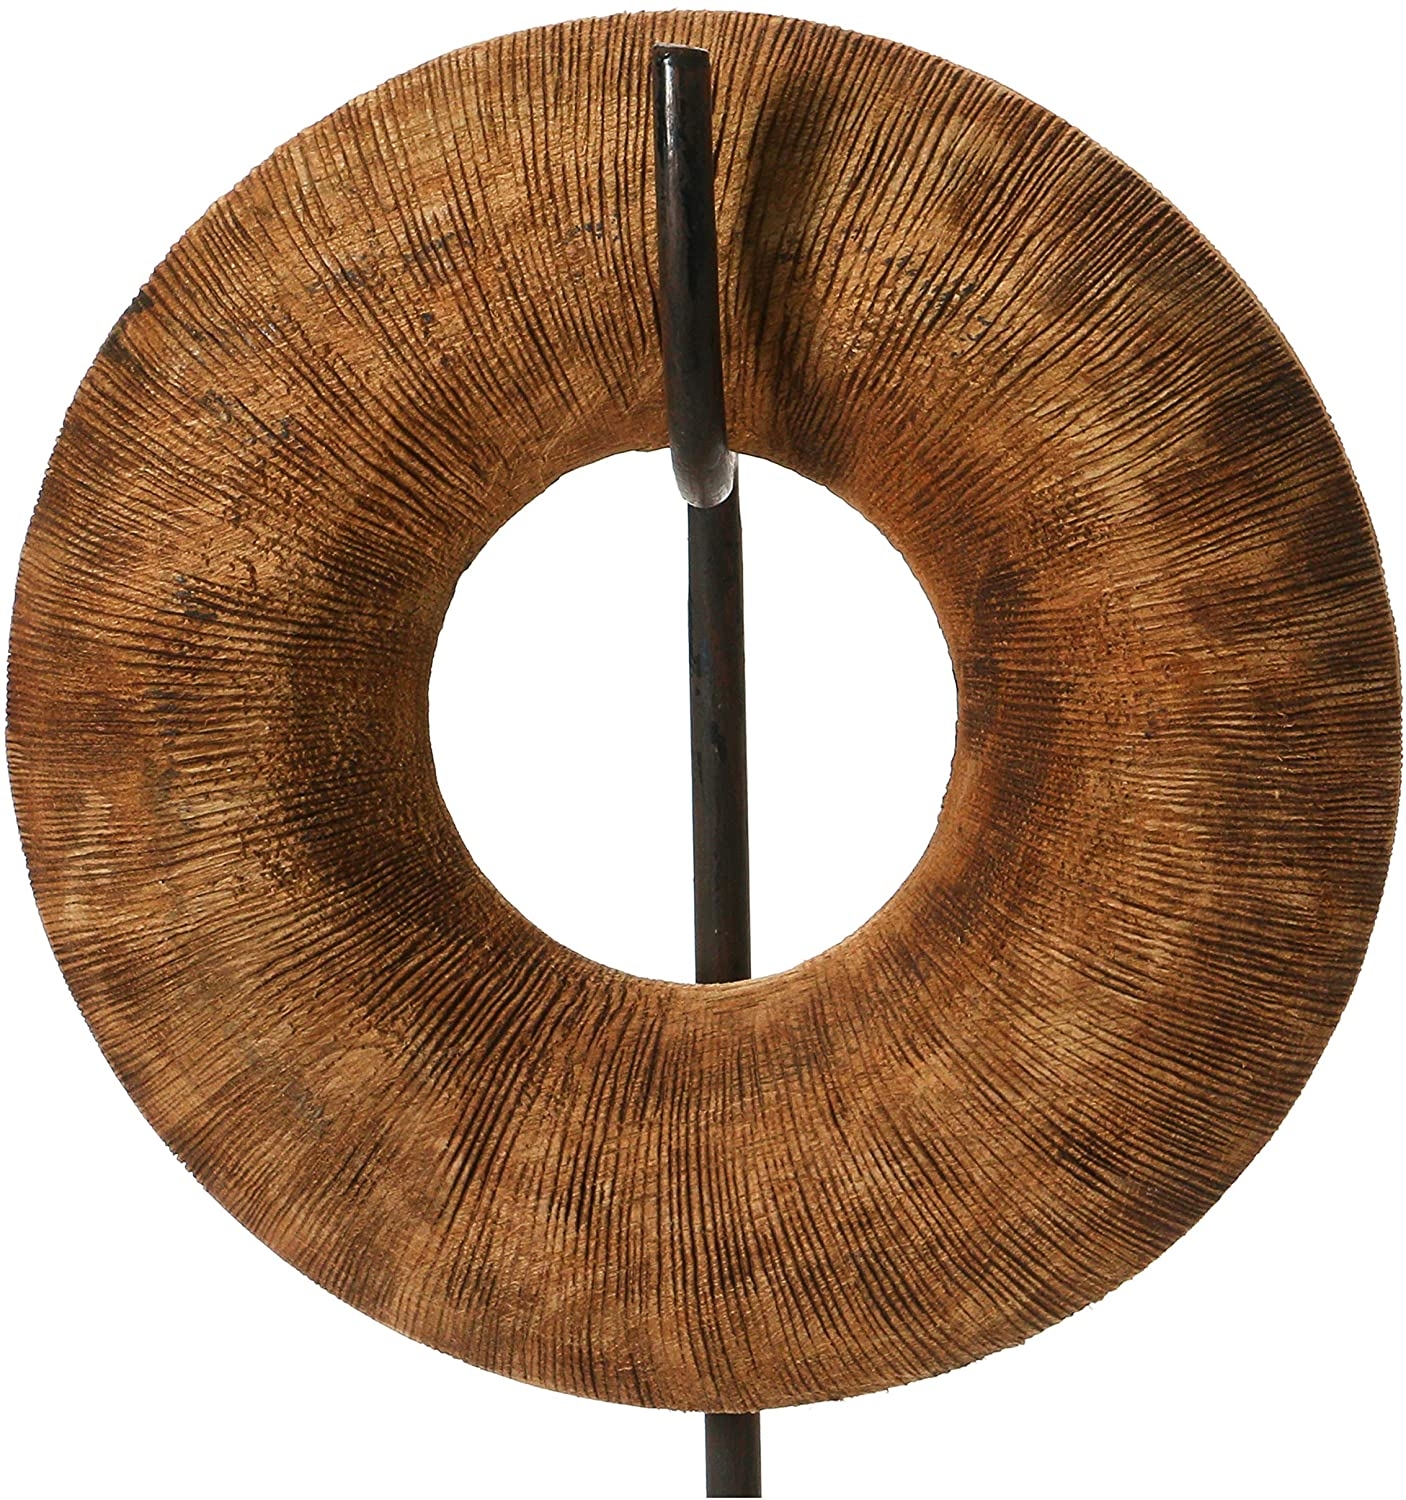 Hand-Carved Mango Wood Circle Object on Metal & Wood Stand, Set of 2 - Image 4